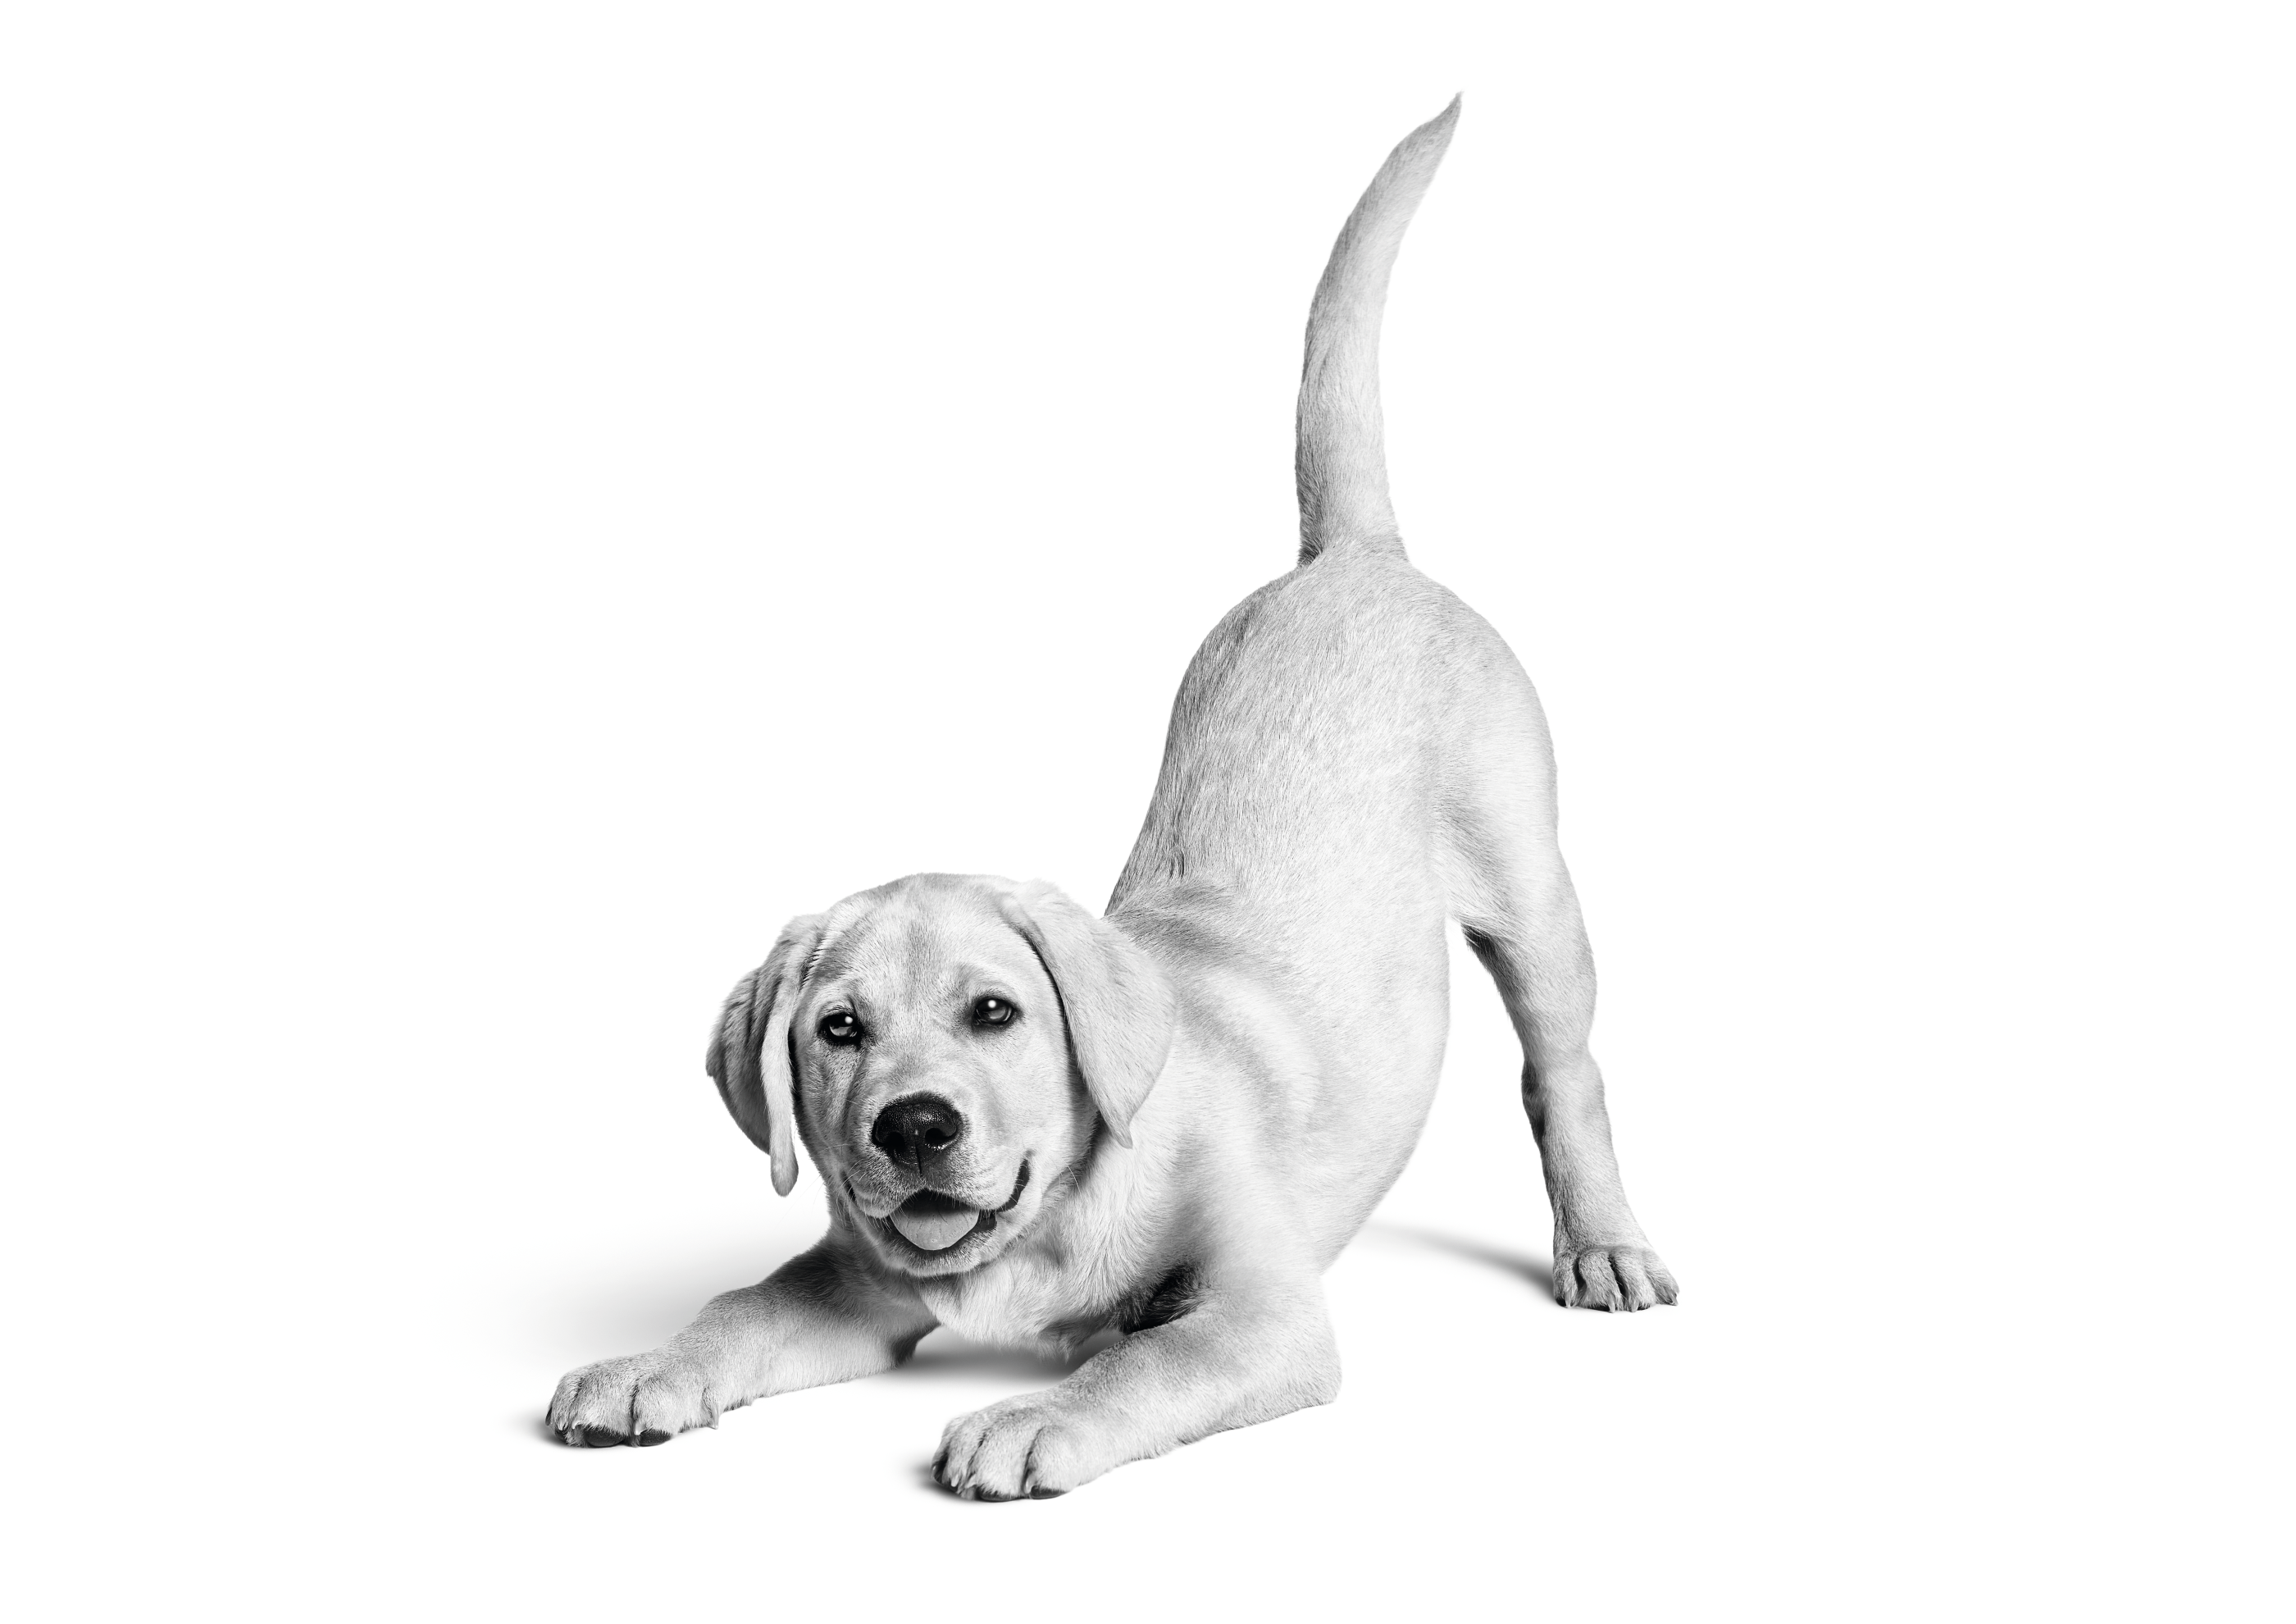 Labrador Retriever puppy crouching playing in black and white